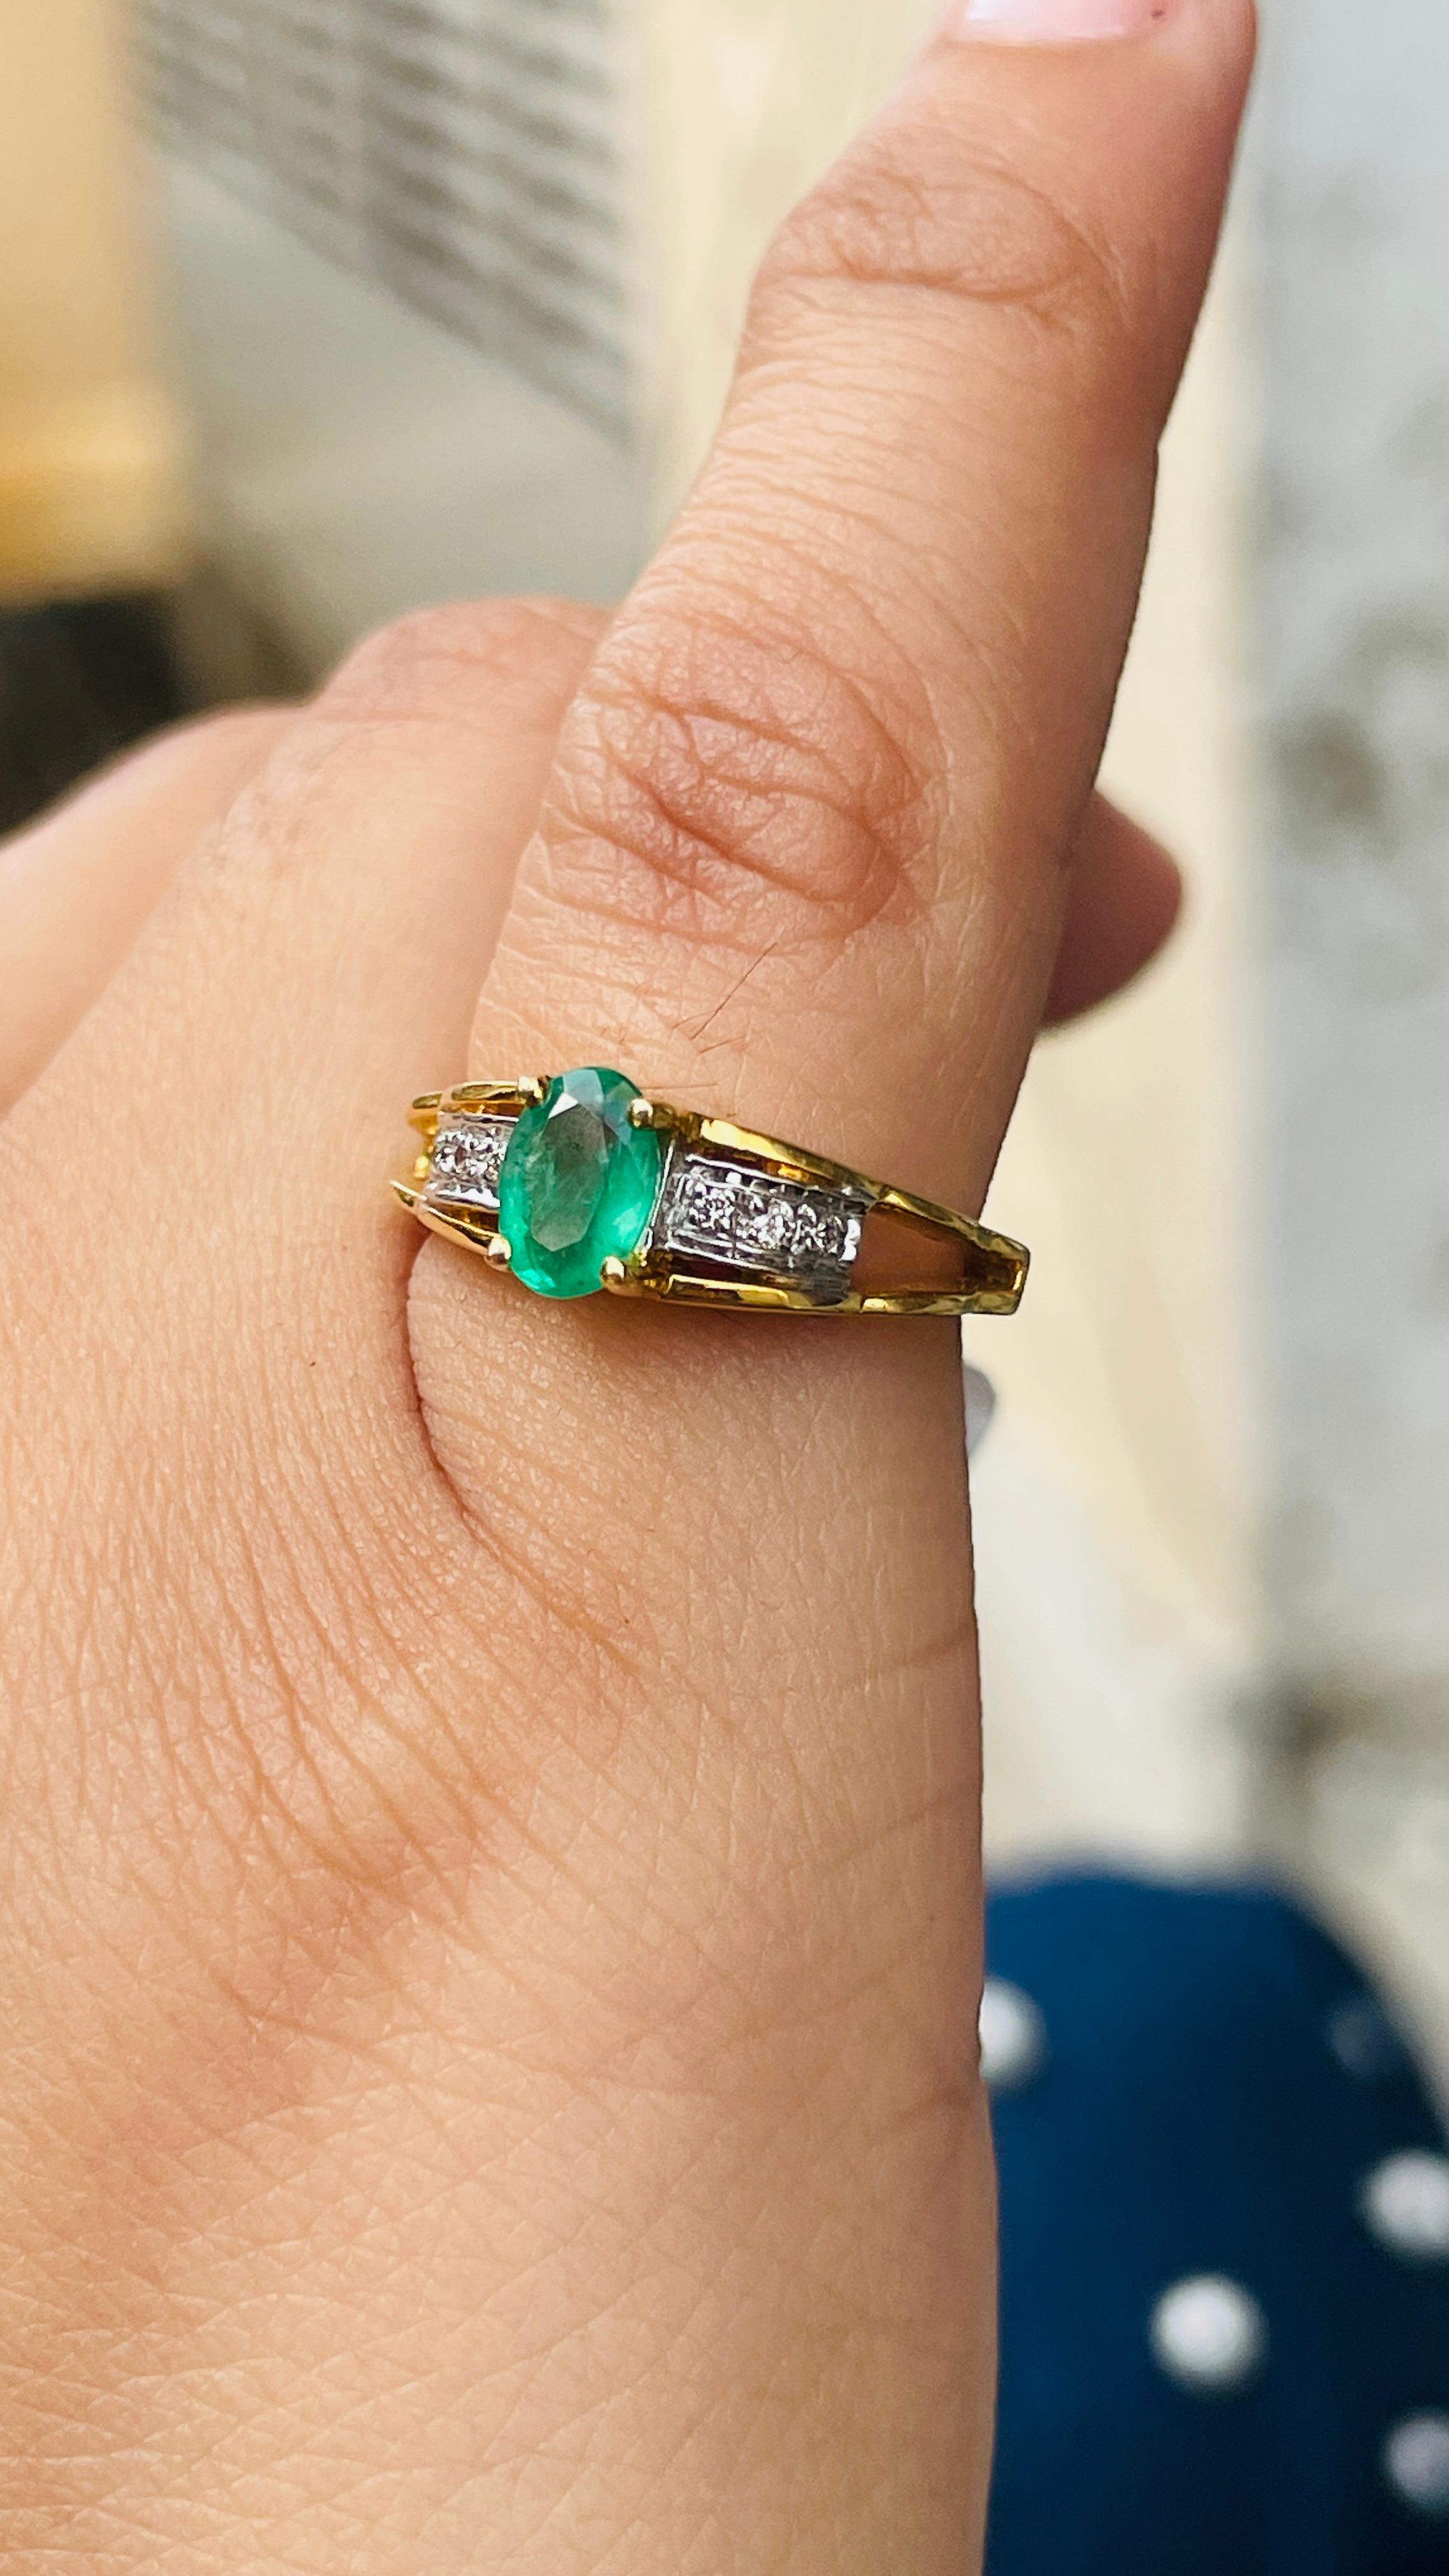 For Sale:  18K Yellow Gold Oval Shaped Emerald Ring with Diamonds 10